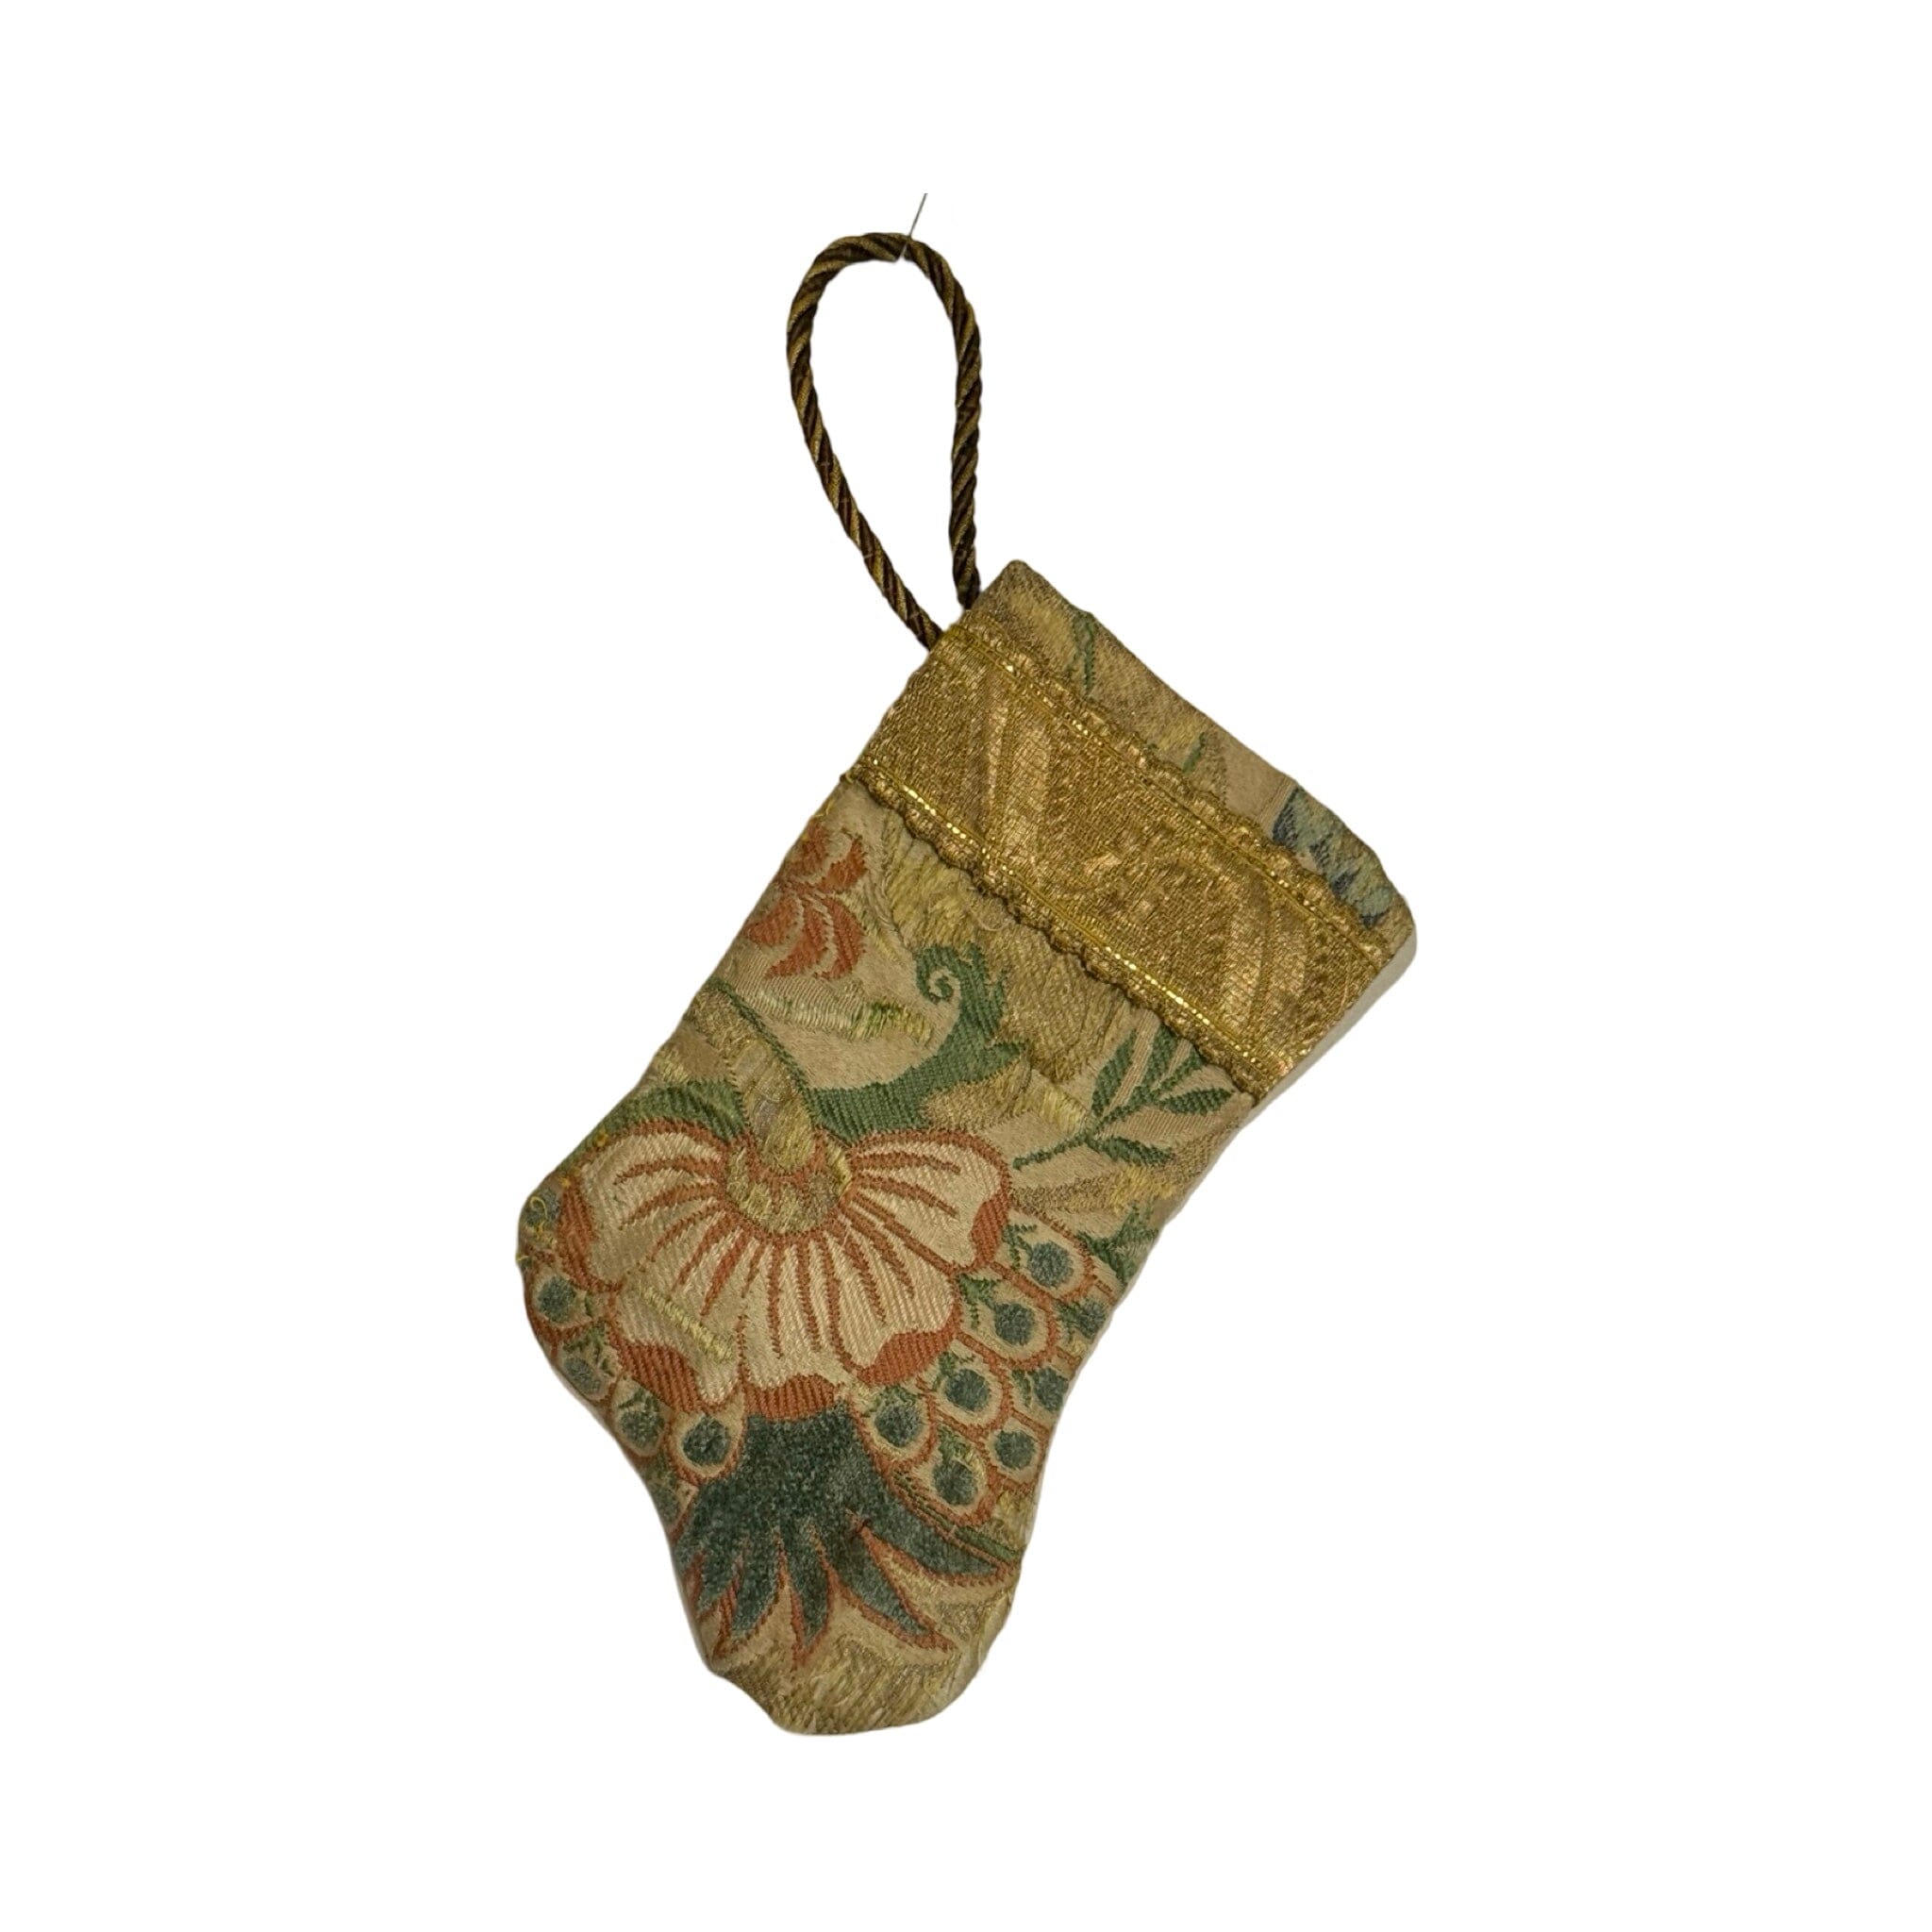 Handmade Mini Stocking Made From Vintage Fabric and Trims- Green and Gold Ornament B. Viz Design A 